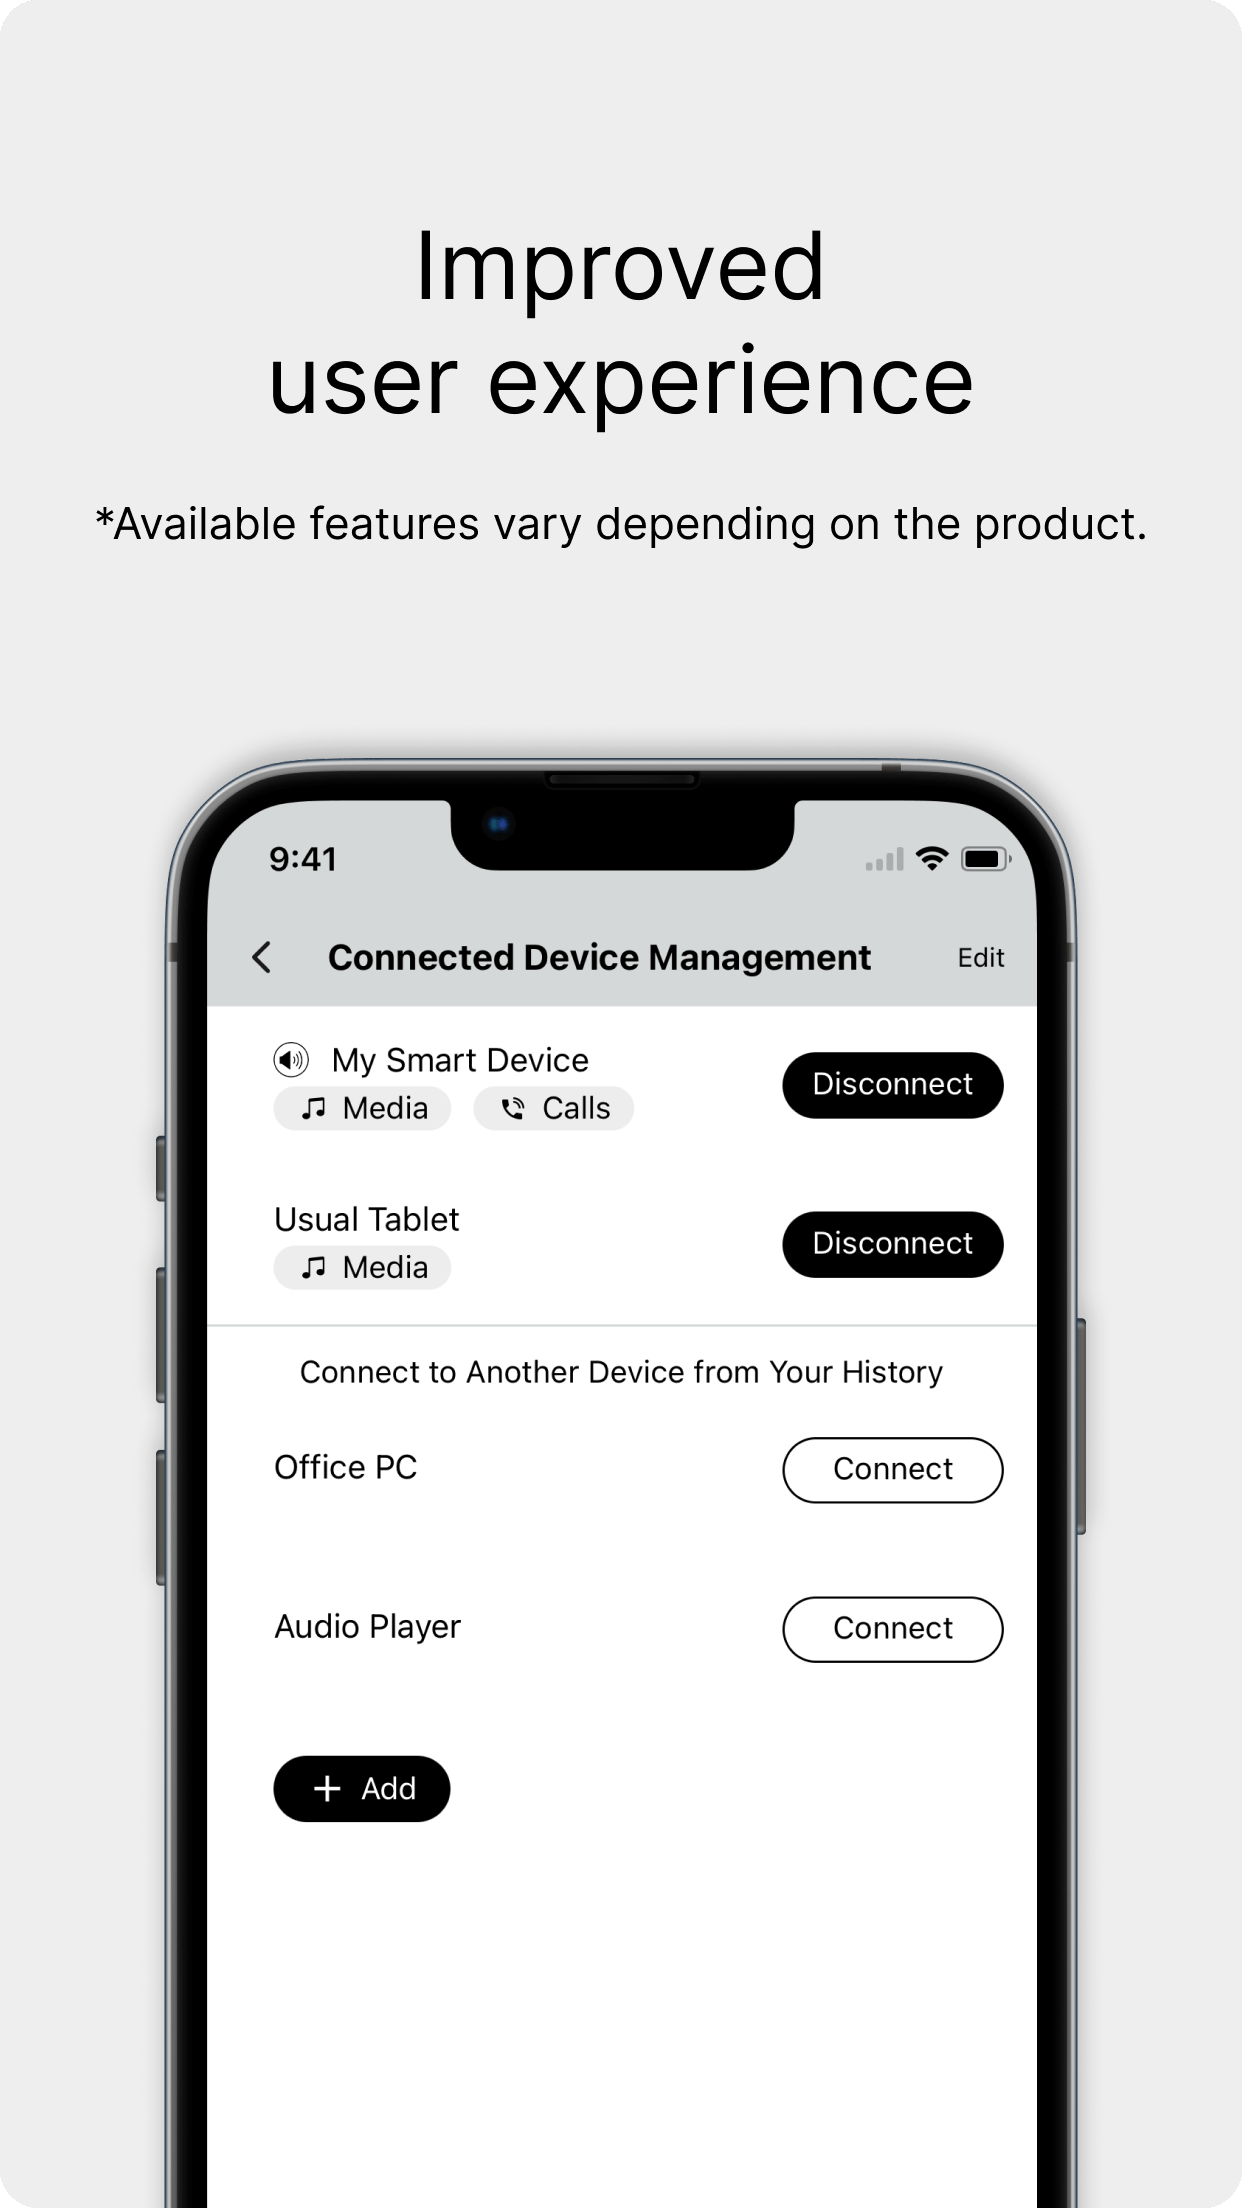 Display on a map where your product was disconnected. Play a sound from the product when you’re nearby but can’t find it.